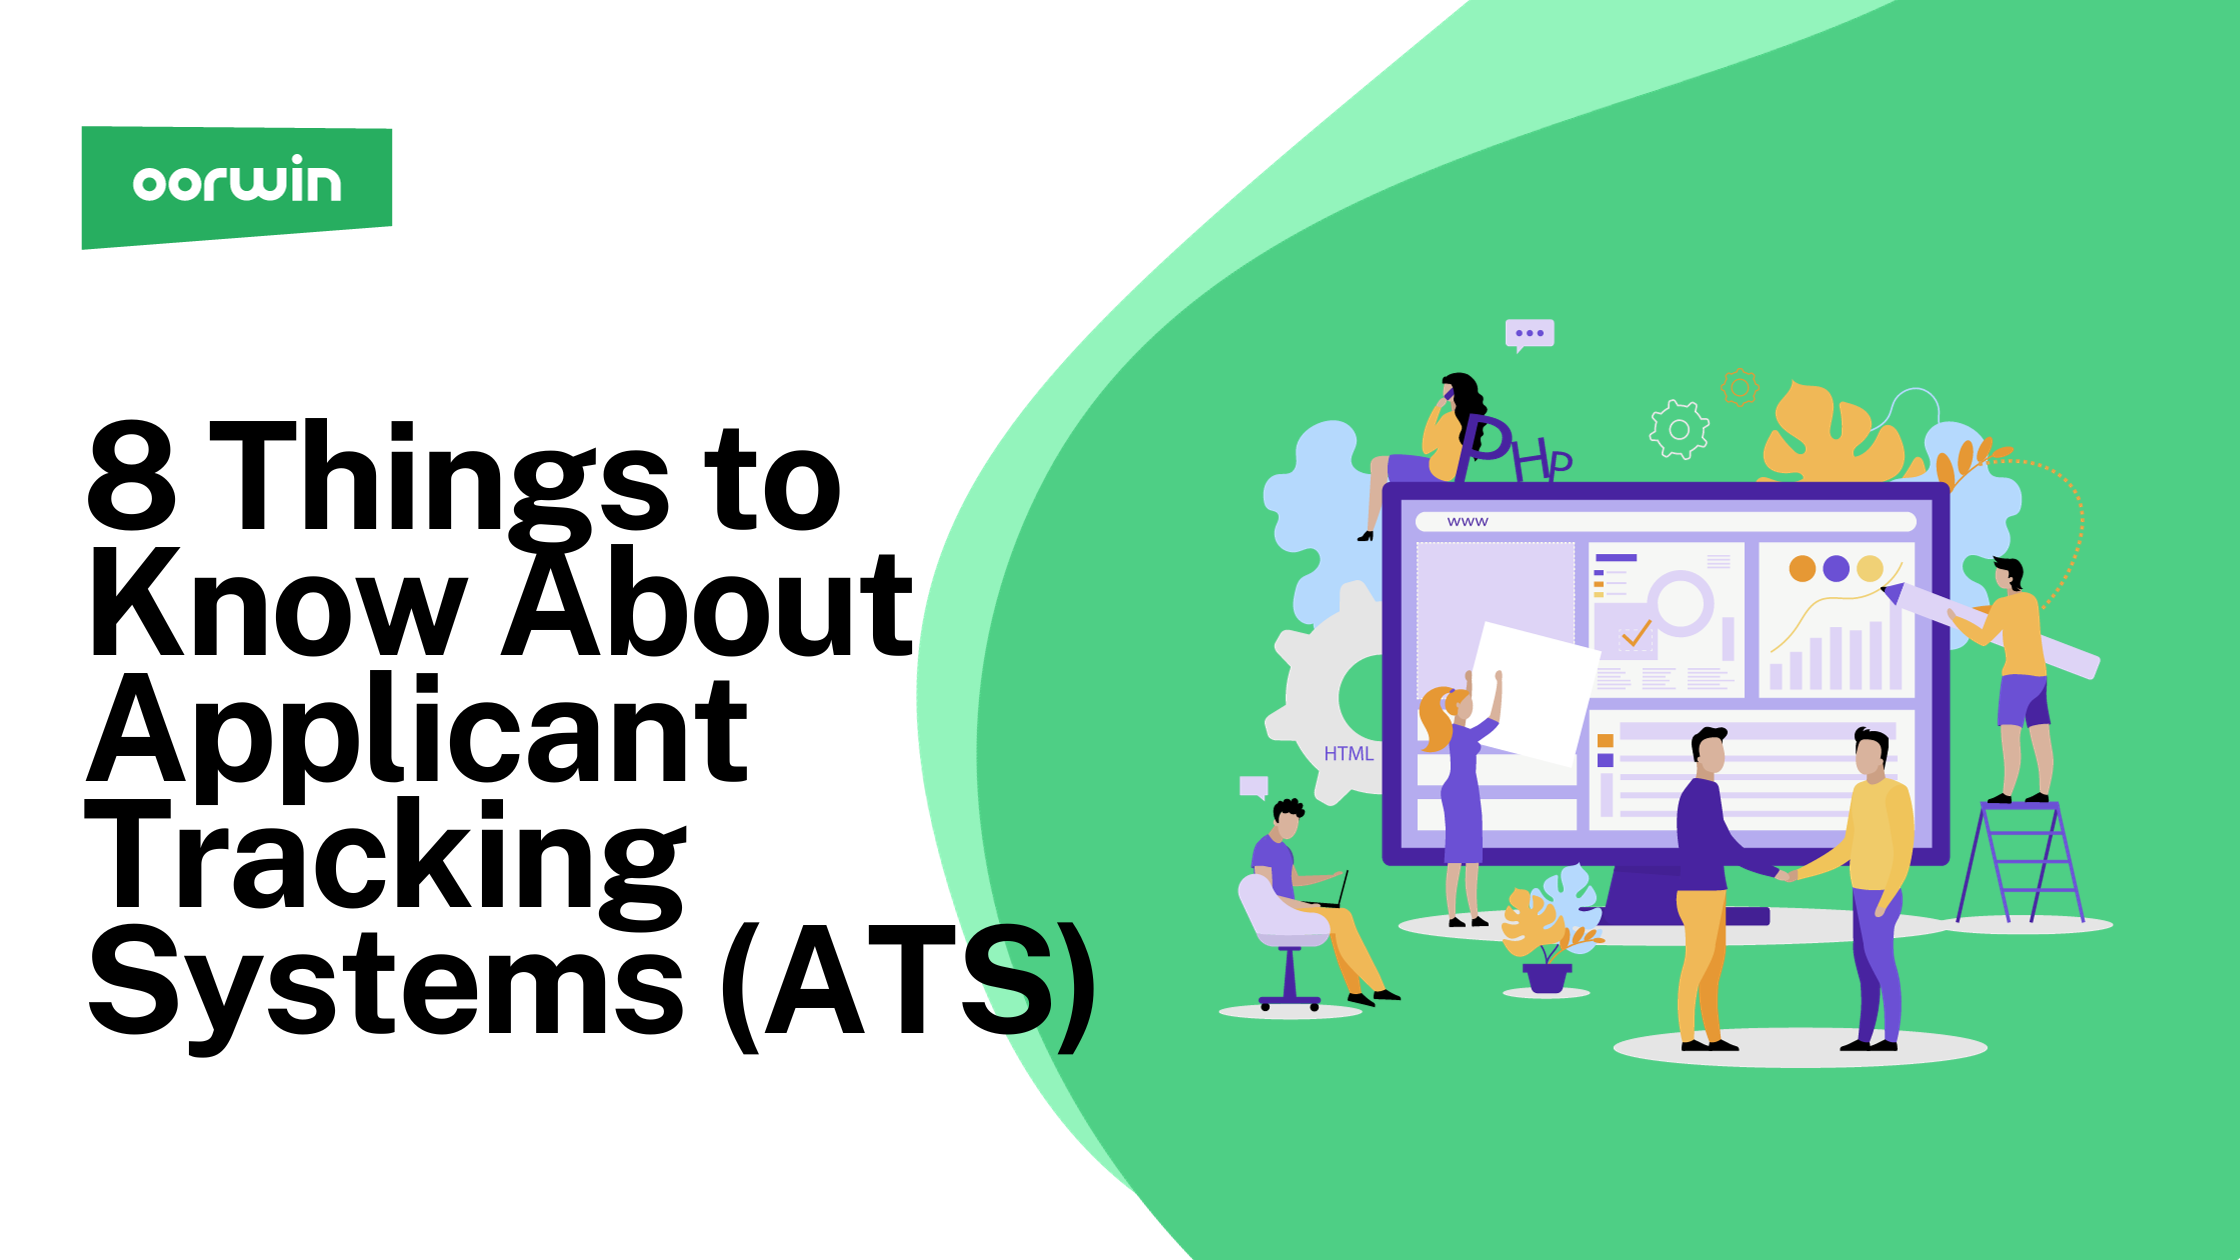 8 Things to Know About Applicant Tracking Systems (ATS)